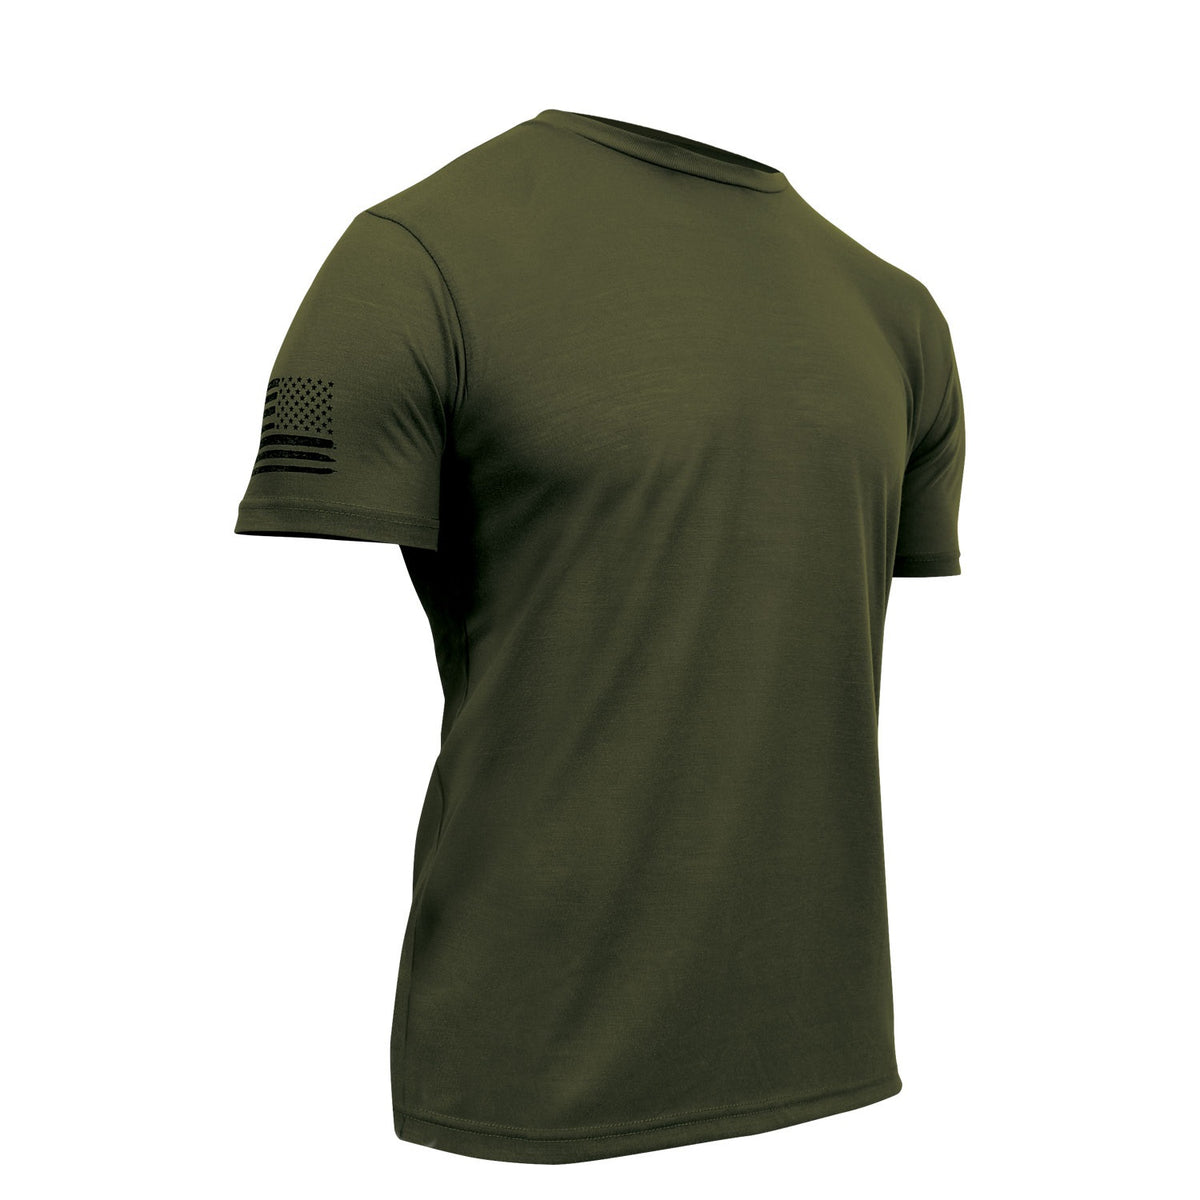 Rothco Tactical Athletic Fit T-Shirt Olive Drab